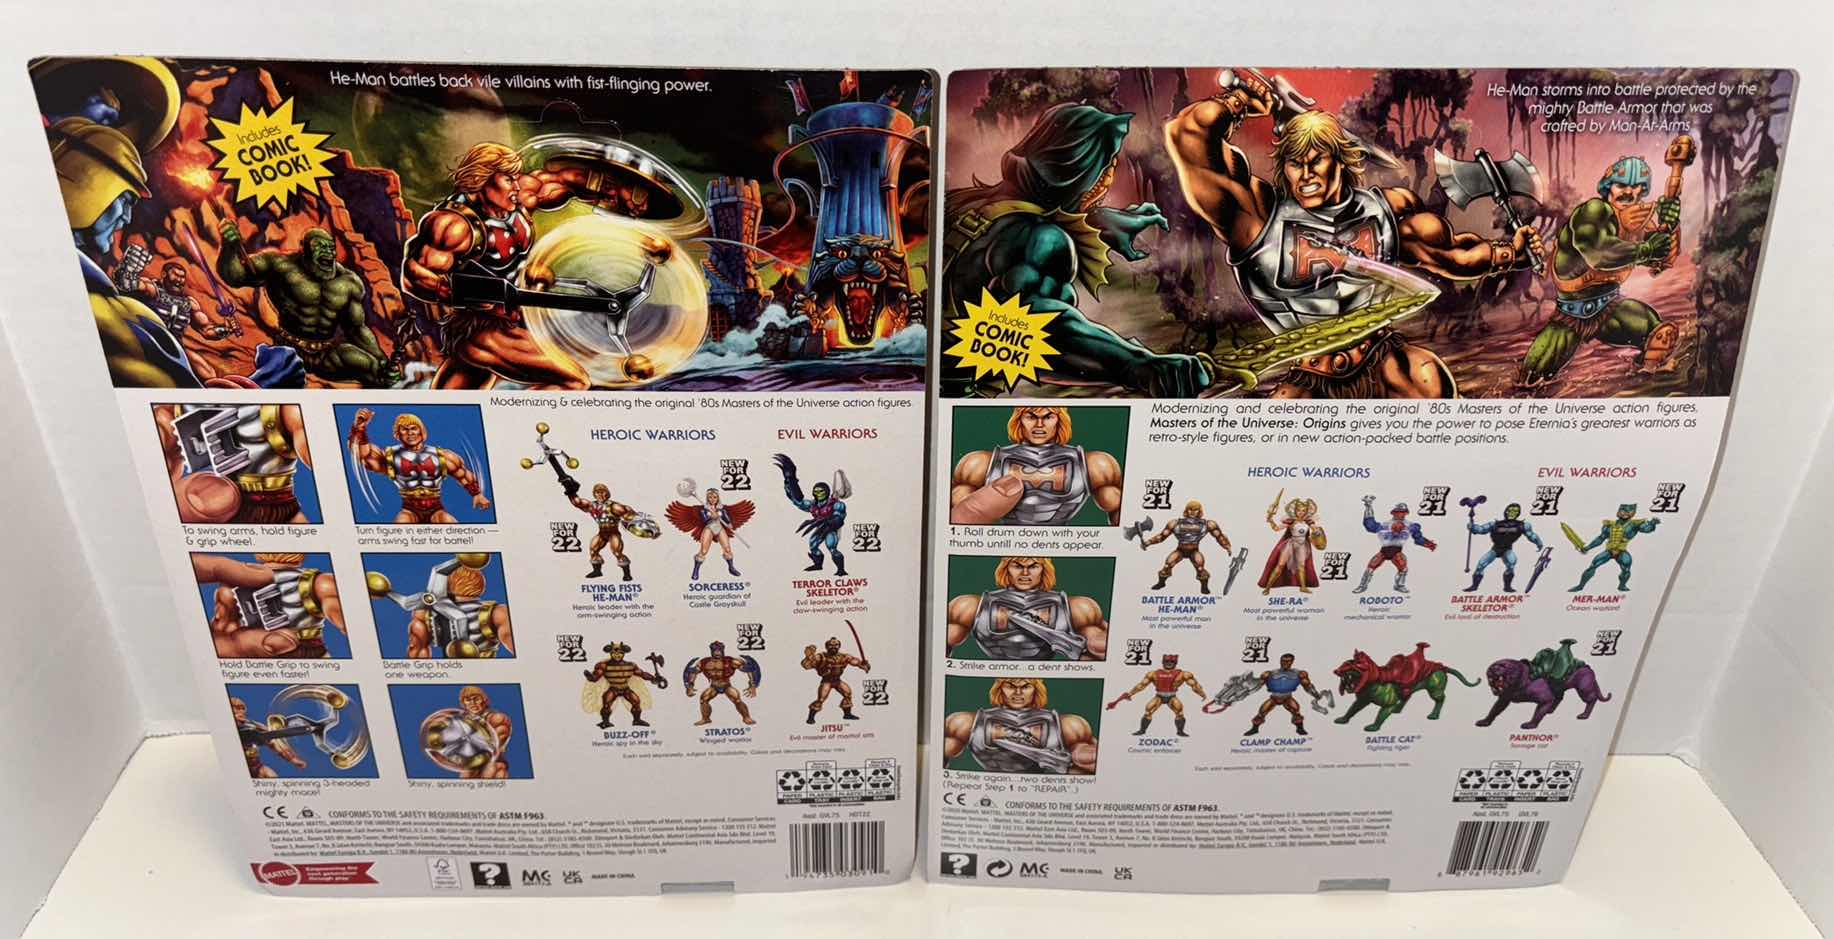 Photo 4 of NEW MATTEL MASTERS OF THE UNIVERSE 2-PACK “FLYING FISTS HE-MAN” & “BATTLE ARMOR HE-MAN” ACTION FIGURES & ACCESSORIES